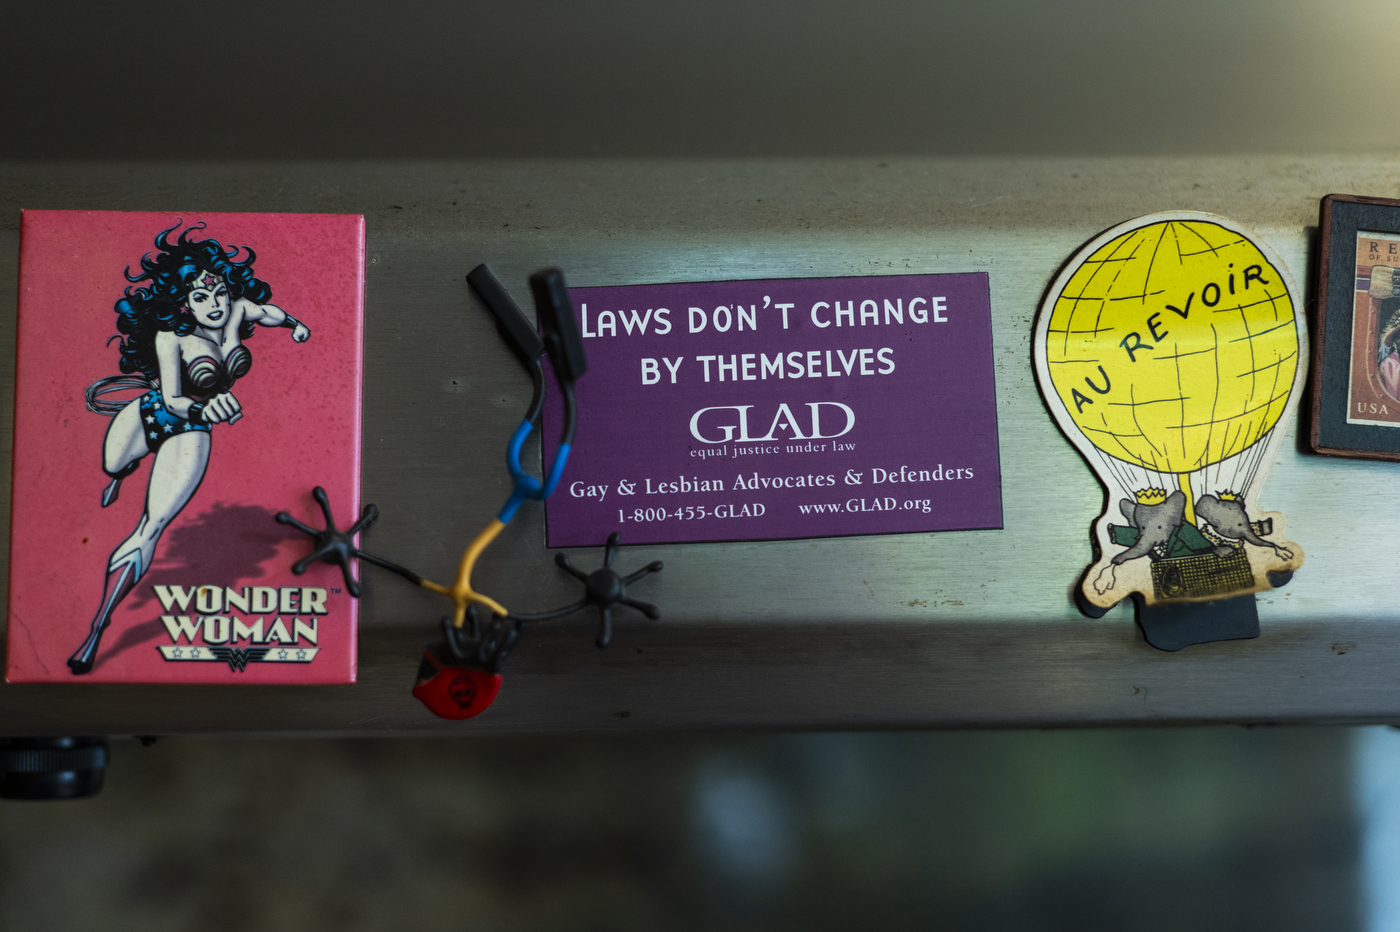 business card for Gay & Lesbian Advocates and Defenders (GLAD) that says "Laws Don't hange By Themselves" besides other miscellaneous stickers and magnets